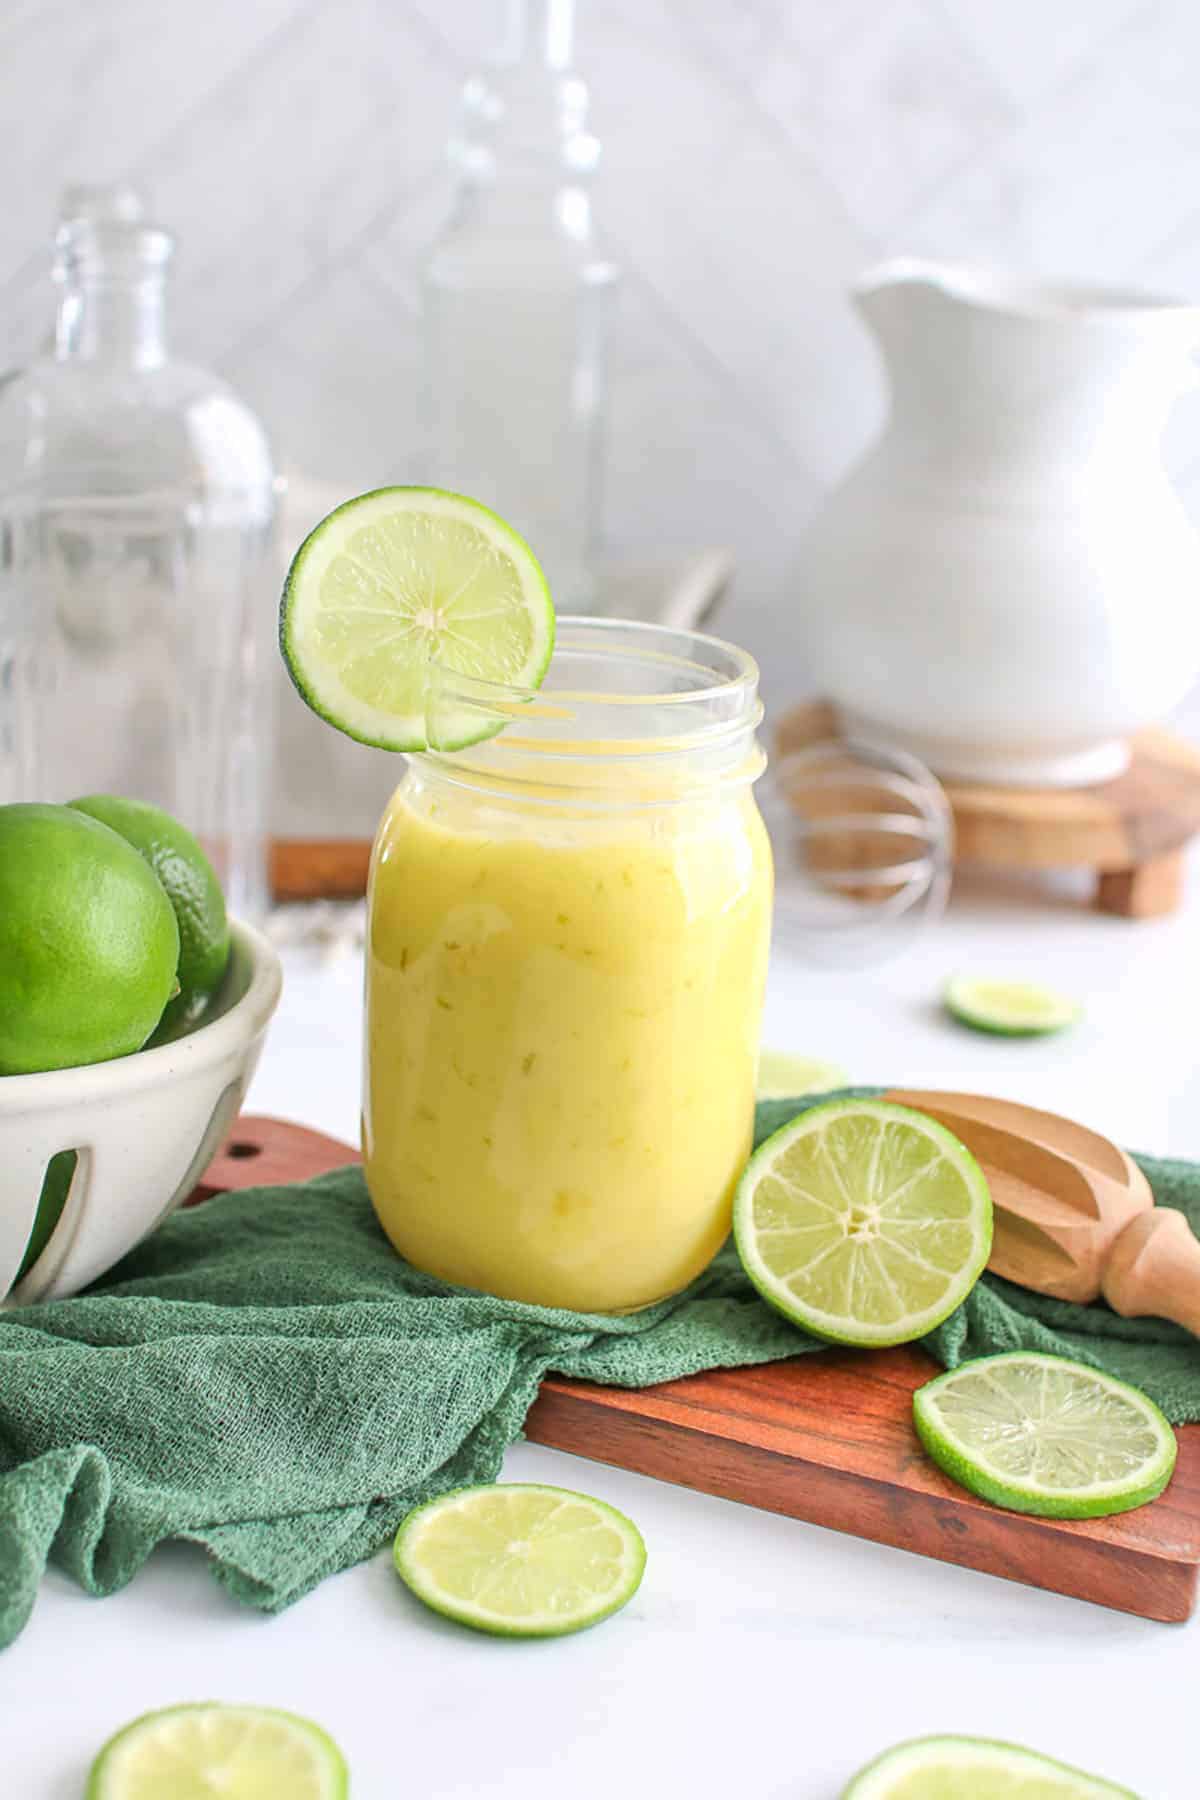 A mason jar fulled of fresh lime curd with a sliced lime on the rim. The jar is on a small wood paddle with limes surrounding it along with a green gauze and citrus zester.